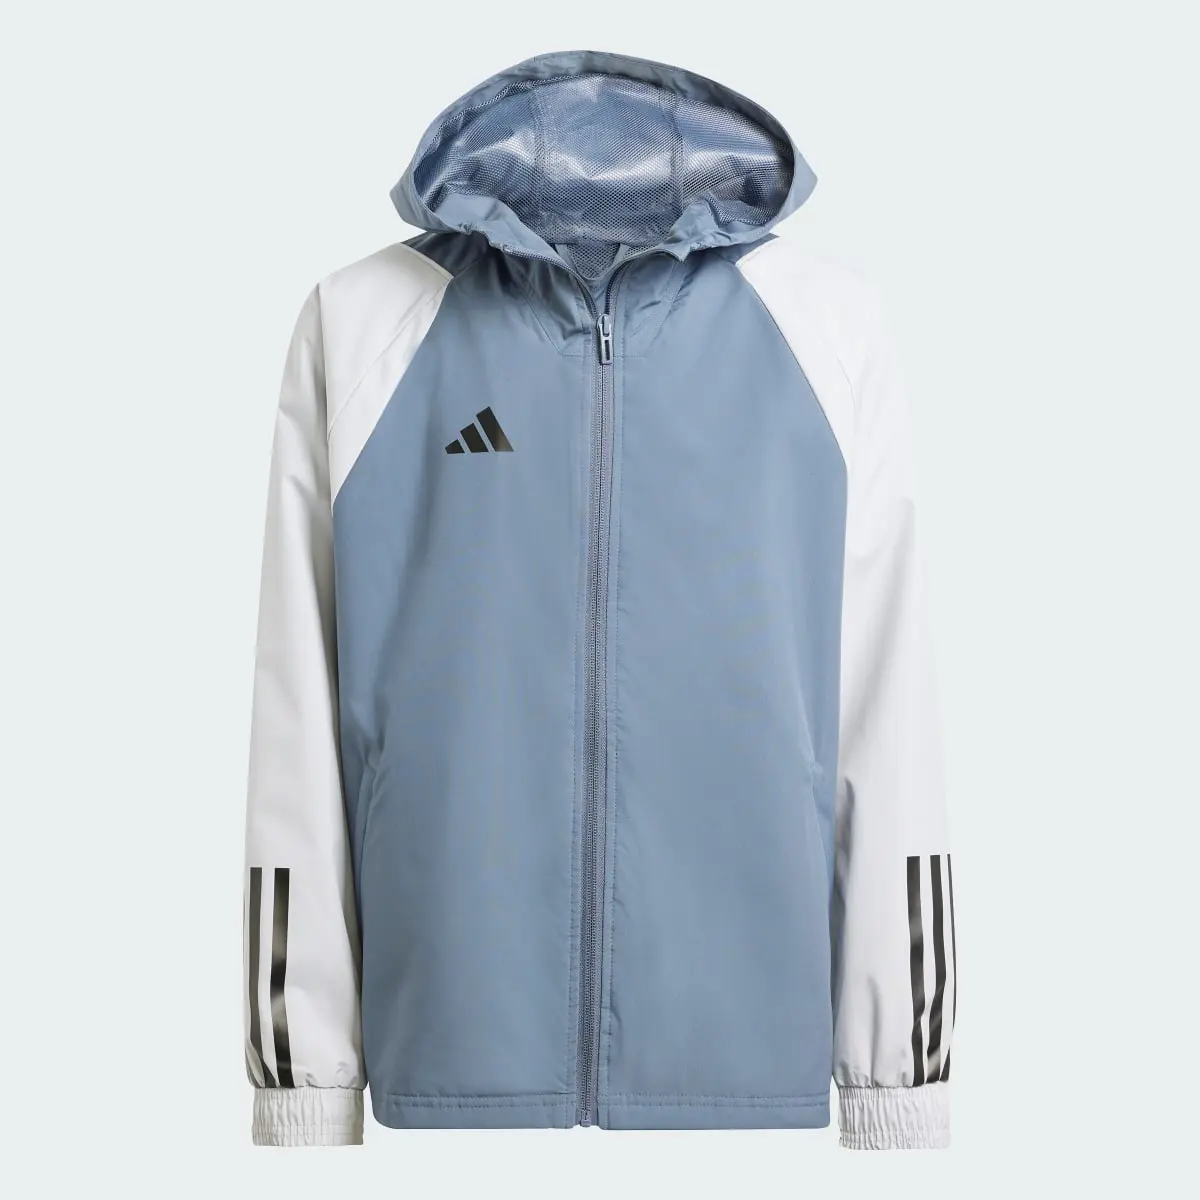 Adidas Tiro 23 Competition All-Weather Jacket. 1